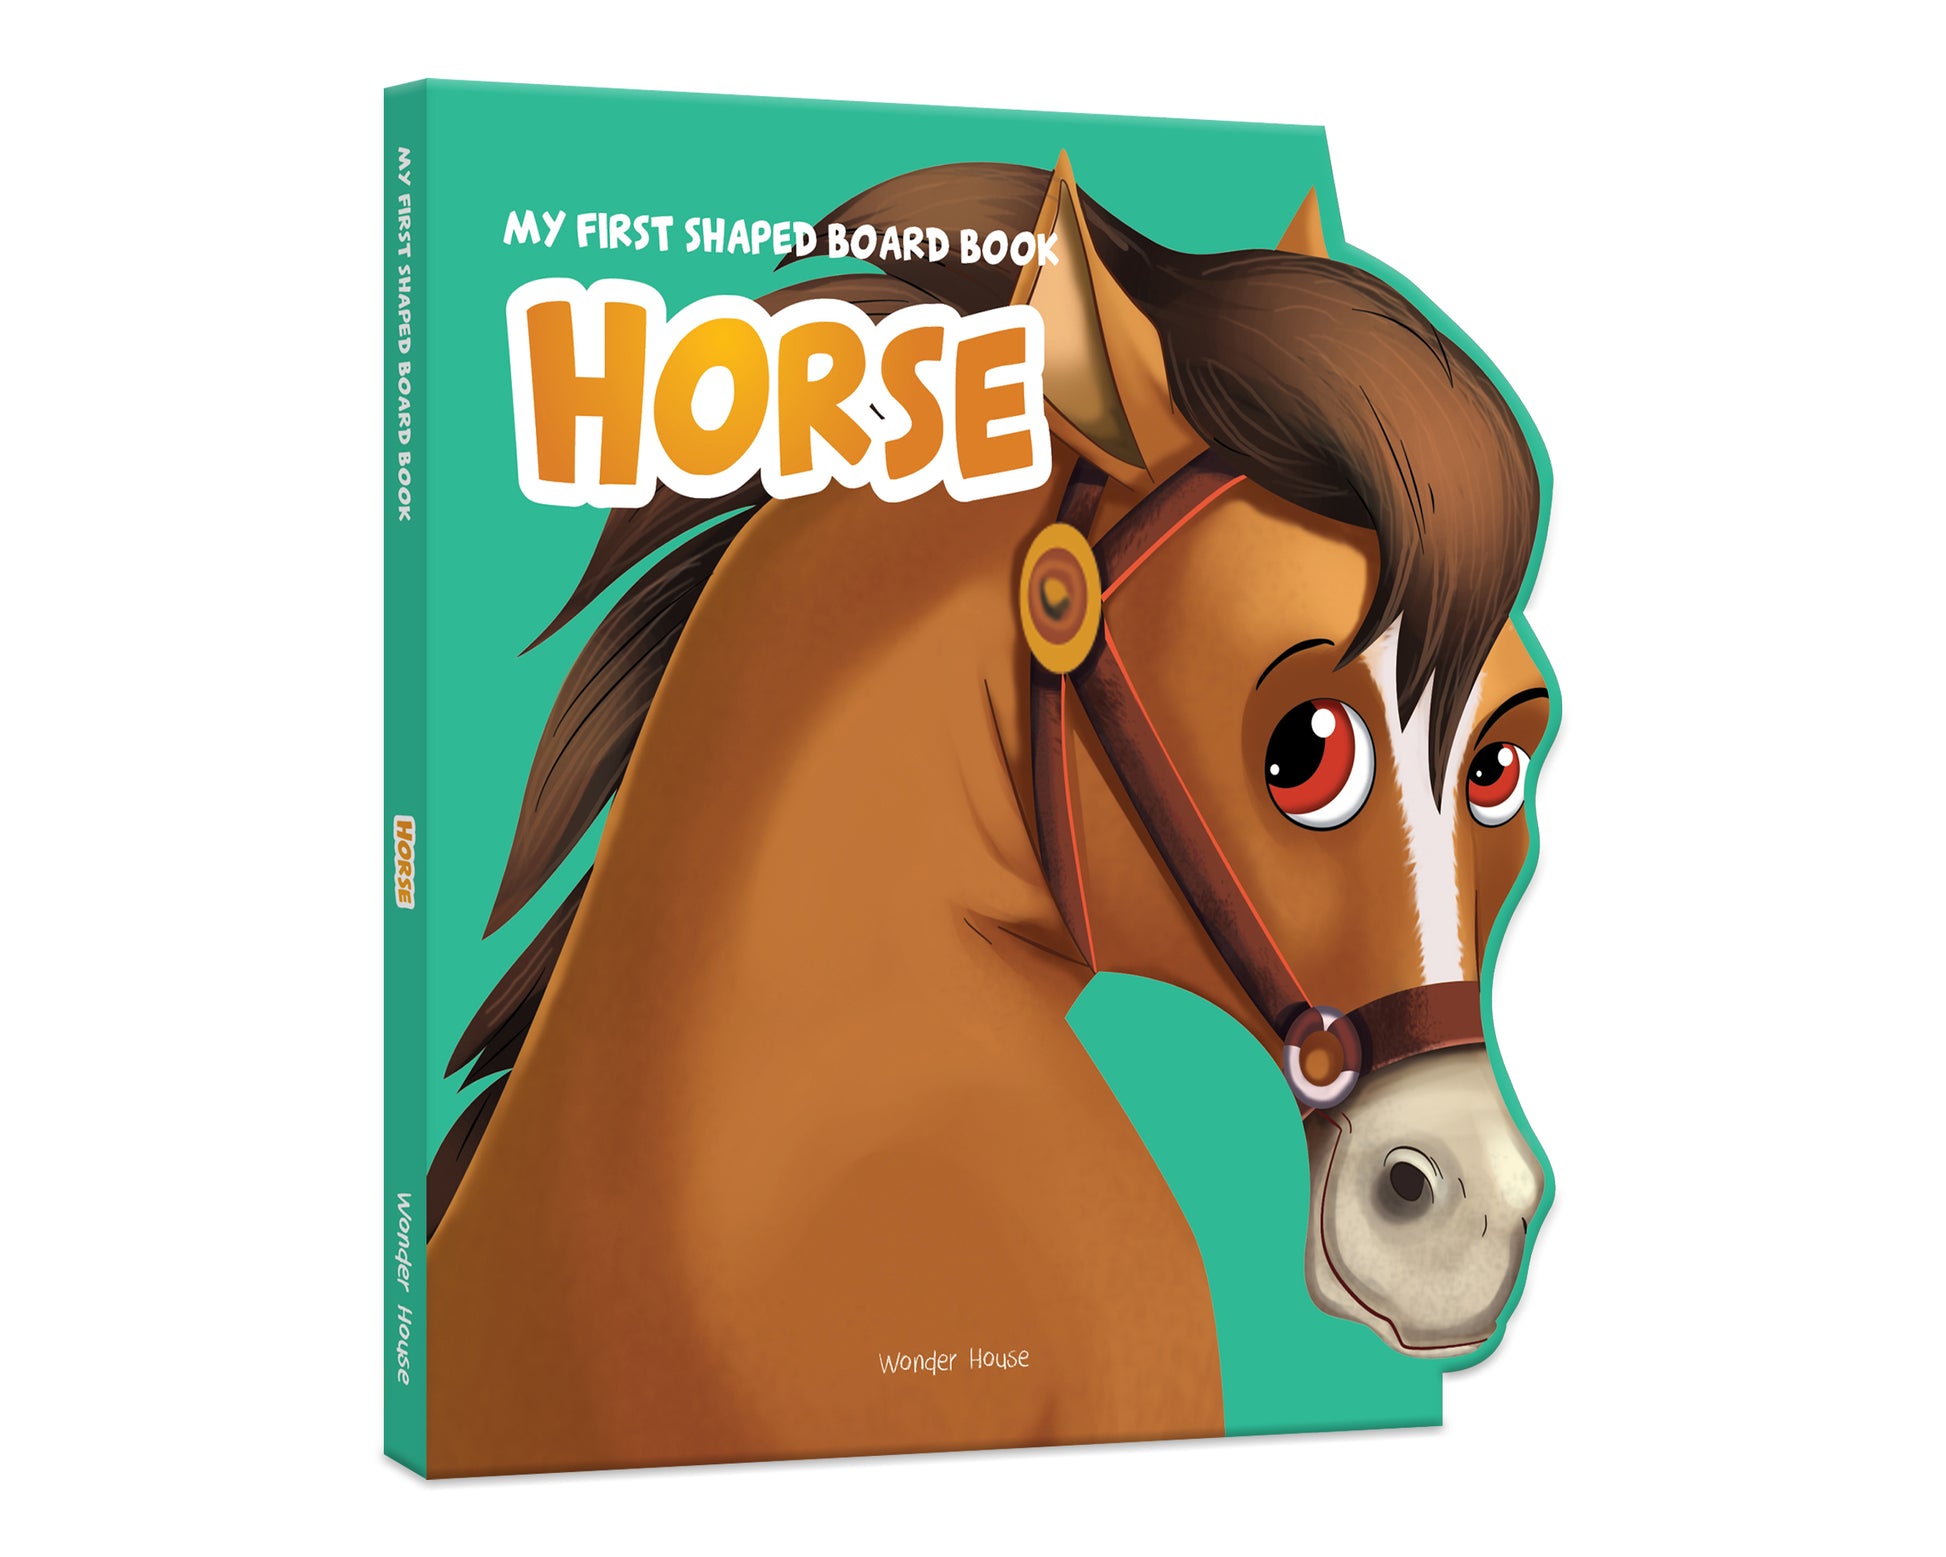 My First Shaped Board Book: Illustrated Horse - Animal Picture Book for Kids Age 2+ Board book